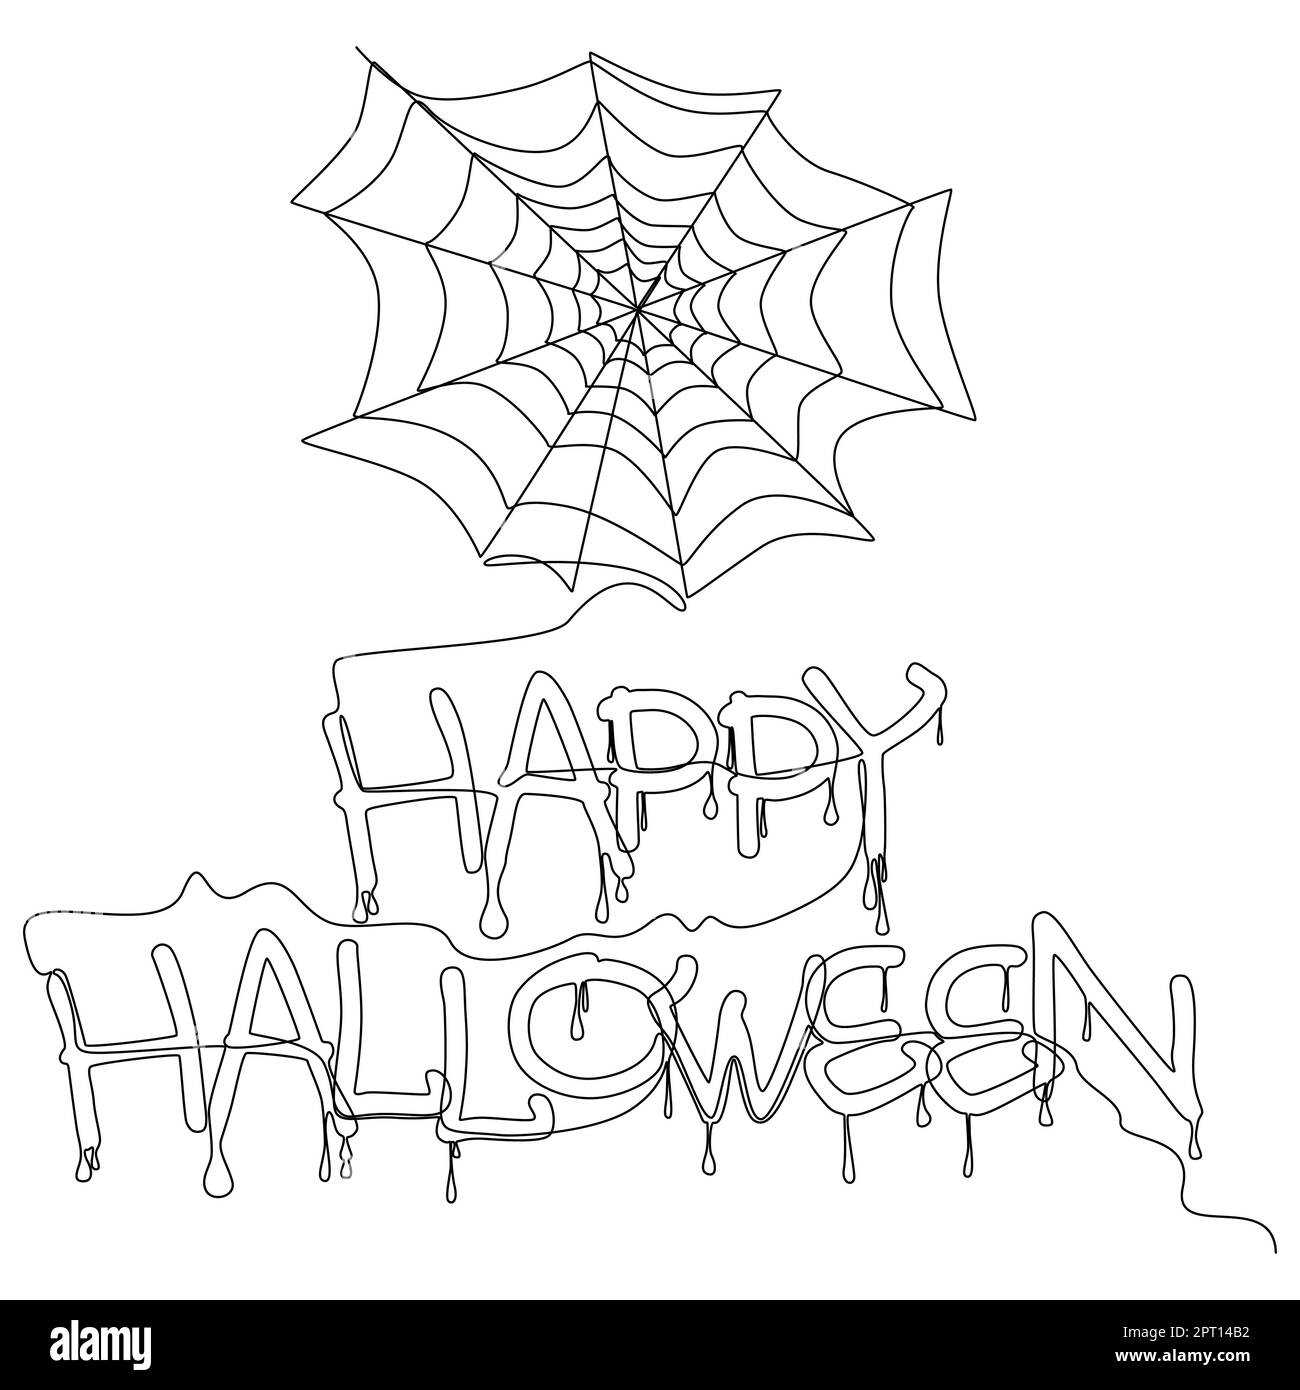 One continuous line of a spider web and Happy Halloween text. Stock Vector